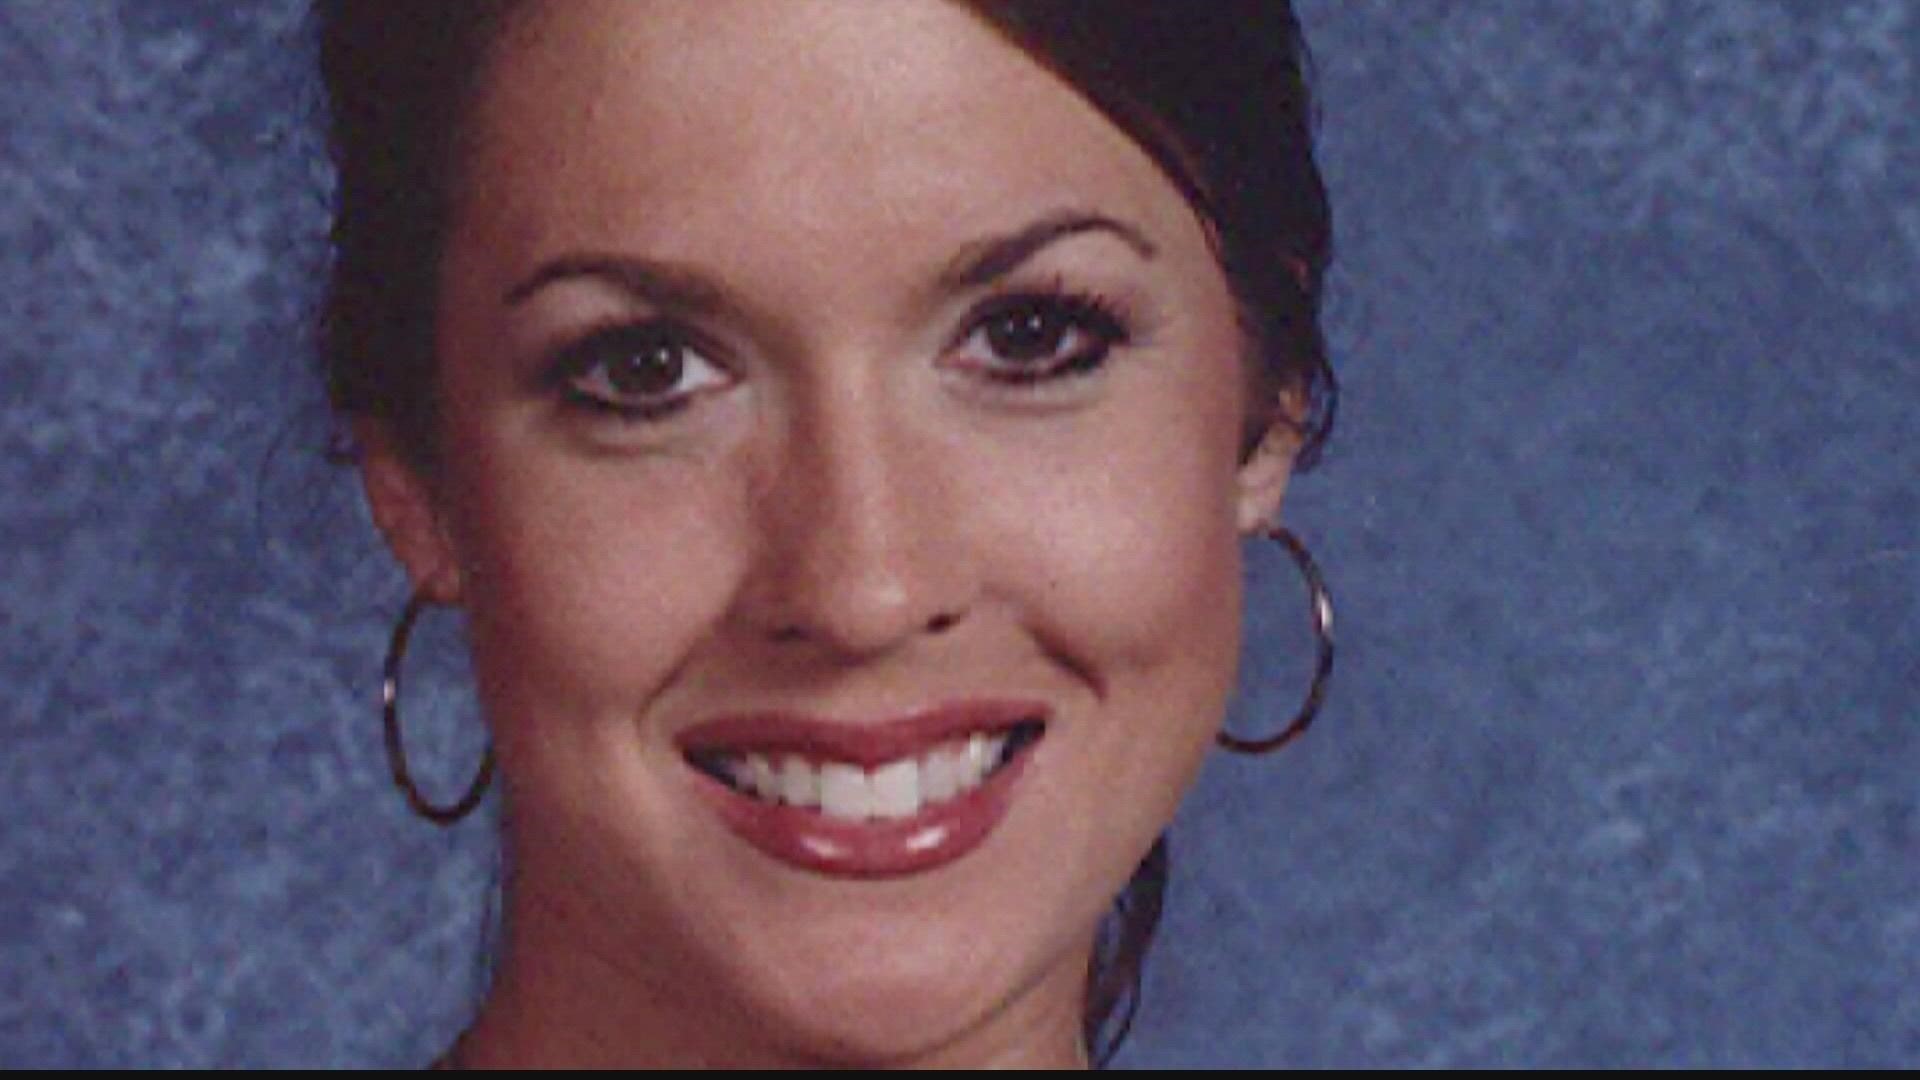 Duke is the man accused of killing Ocilla teacher and beauty queen Tara Grinstead in Oct. 2005